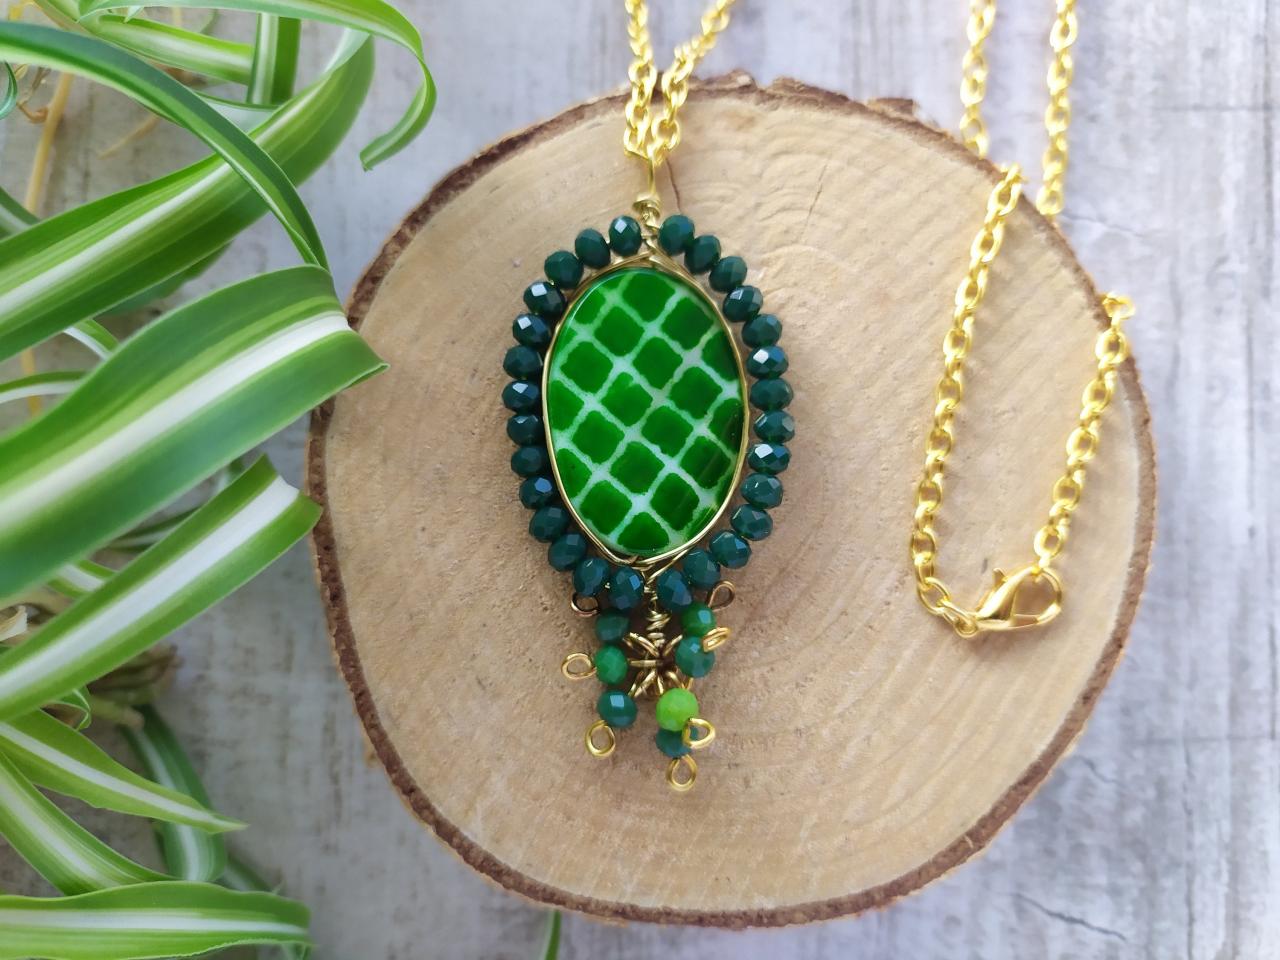 Green Long Chain Necklace, Green Shell And Gold Chain Pendant, Glass Beads Cluster Pendant, Bright Green And Gold Pendant,green Boho Jewelry